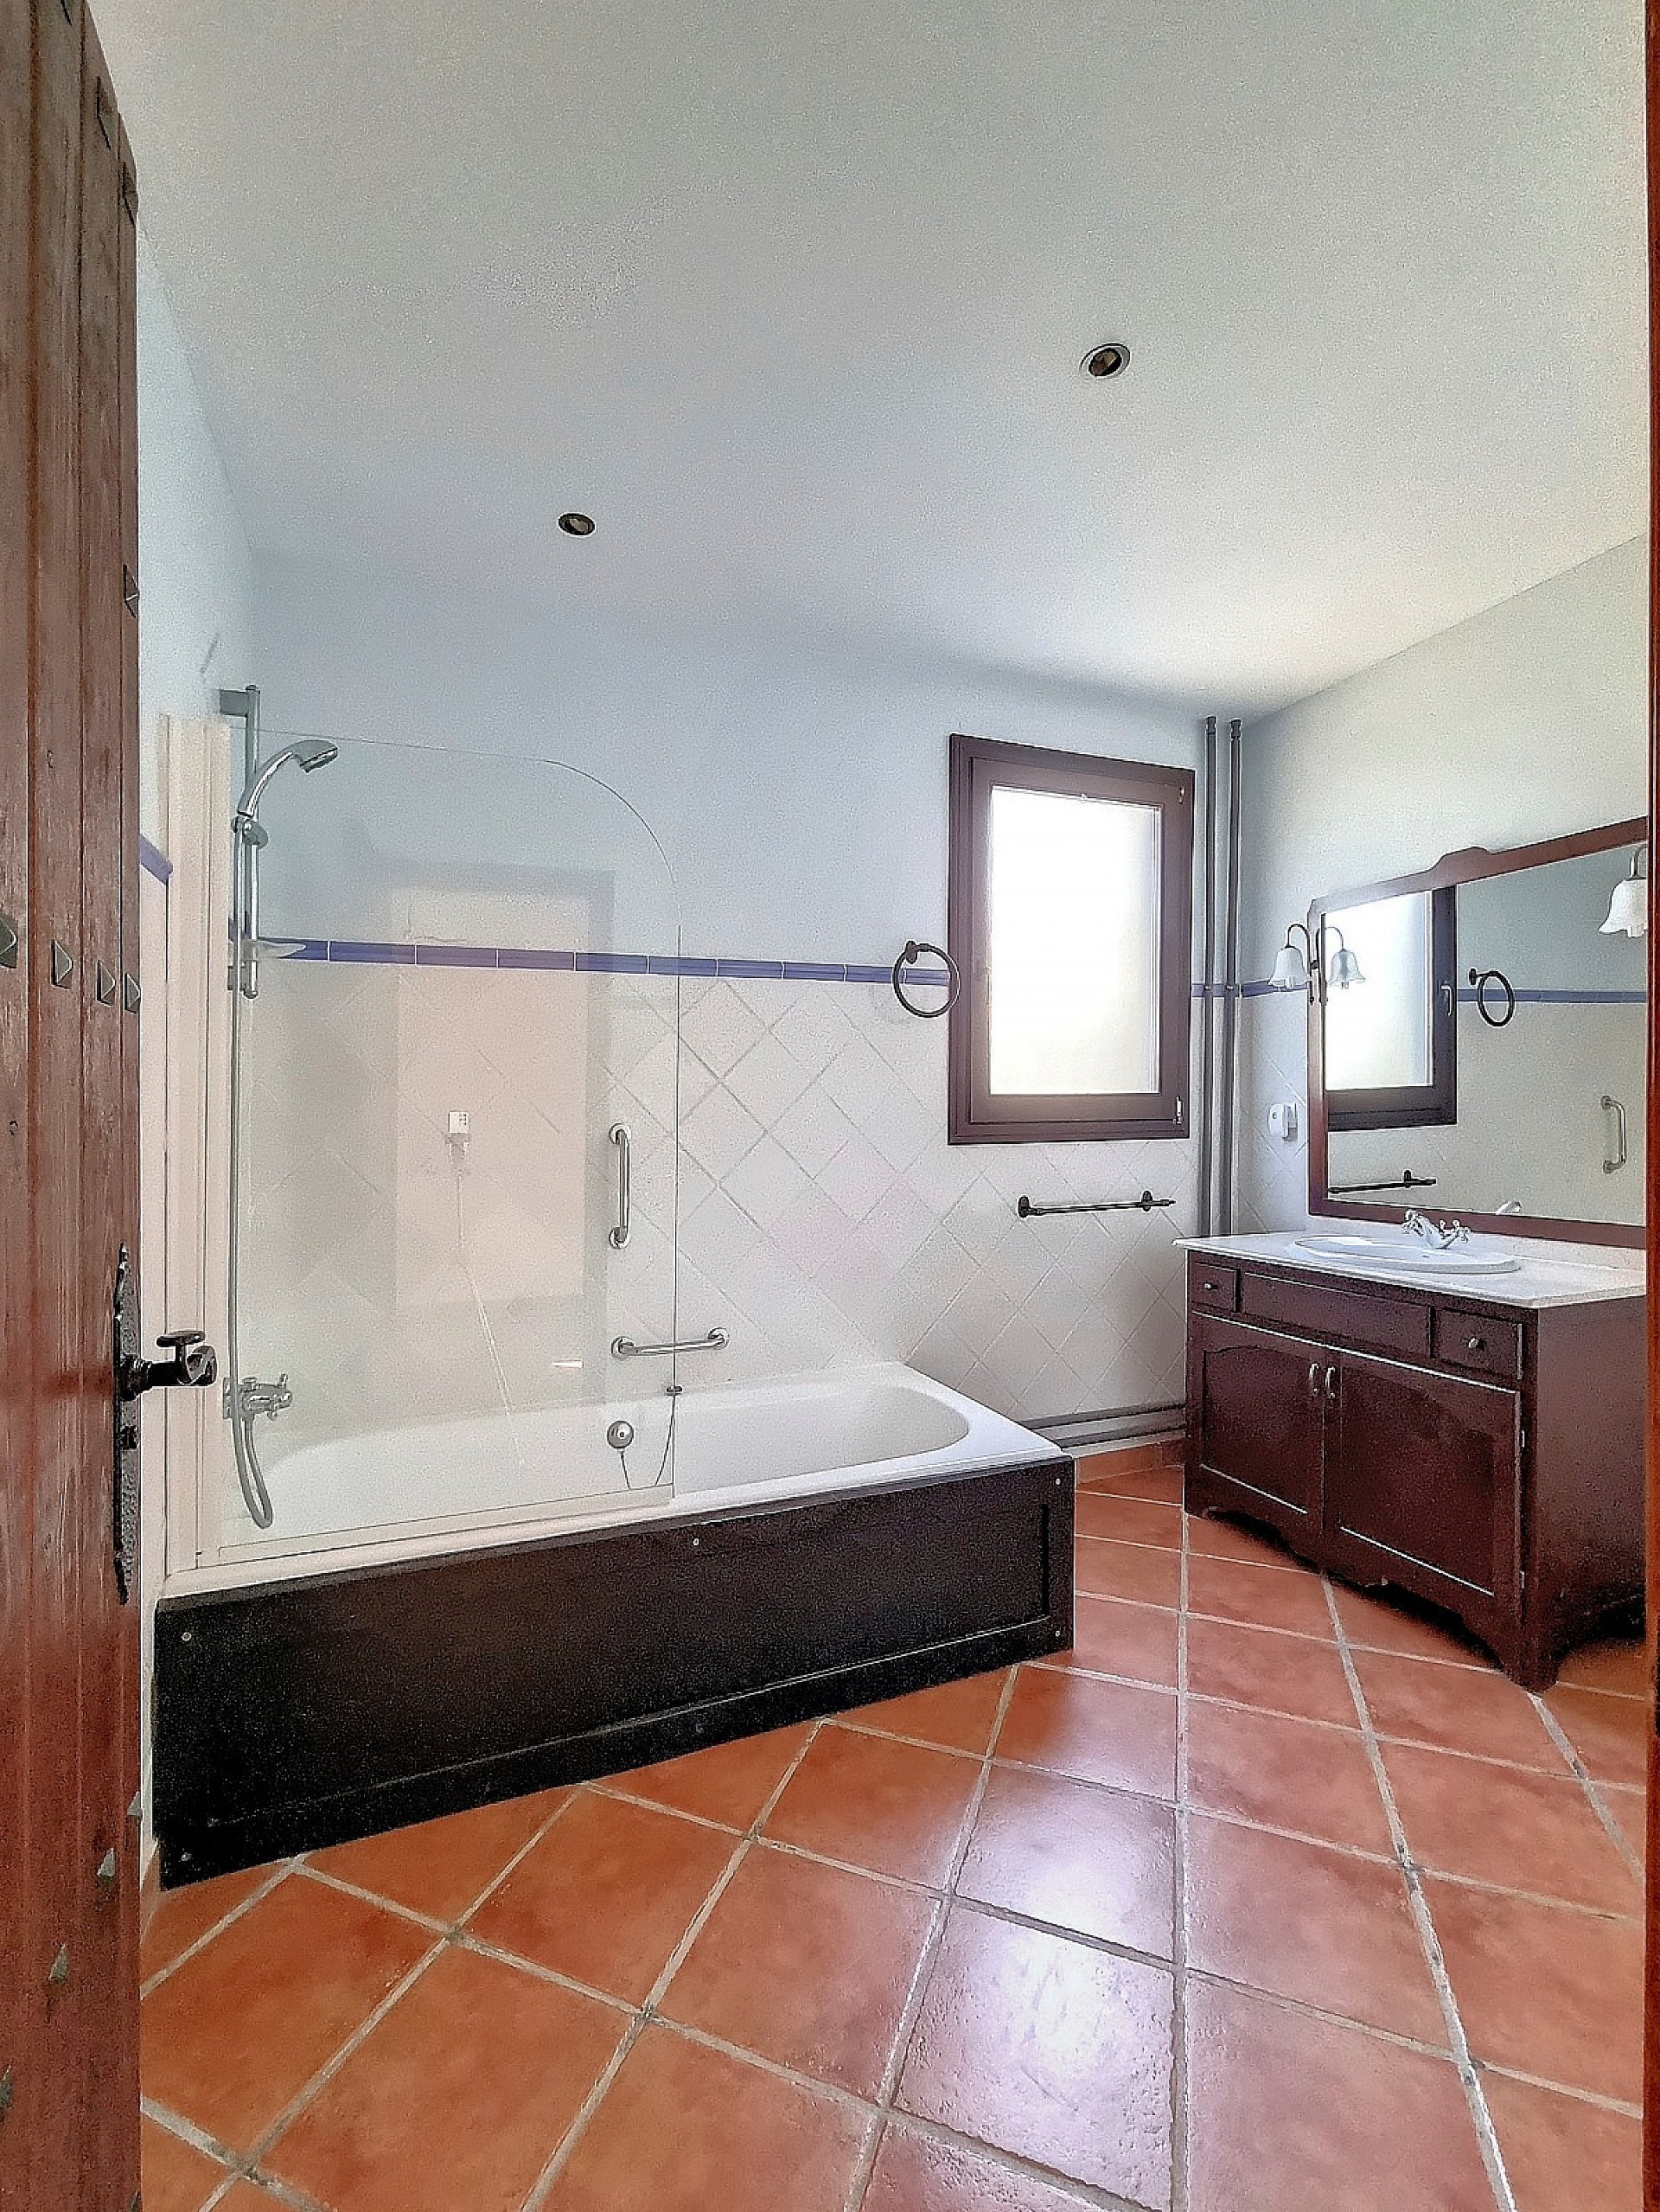 Countryhome for sale in Guardamar and surroundings 17